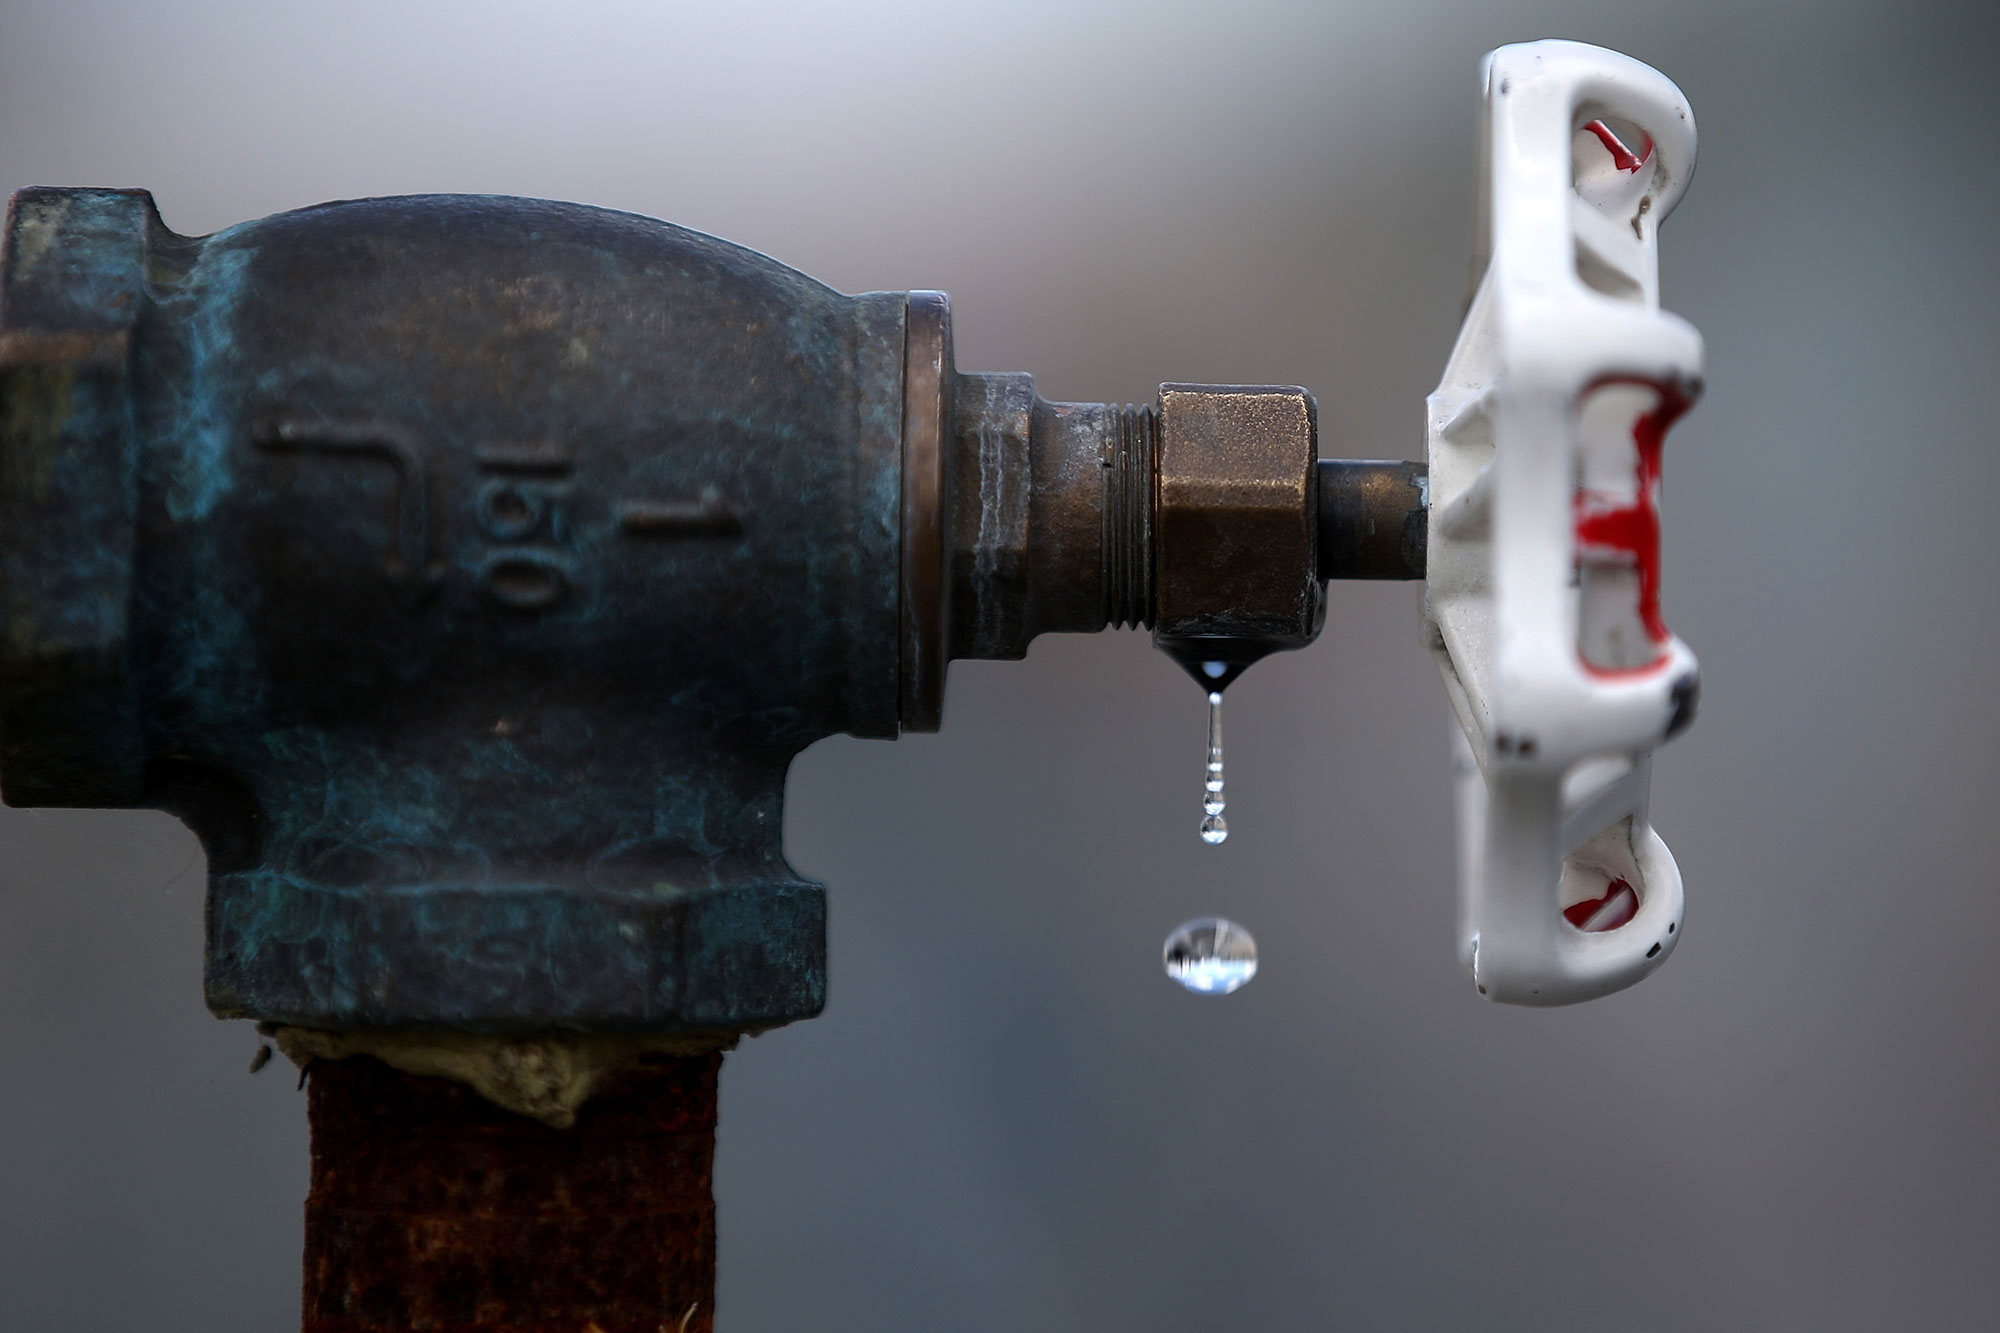 UCT tap water study goes postal | UCT News - University of Cape Town News